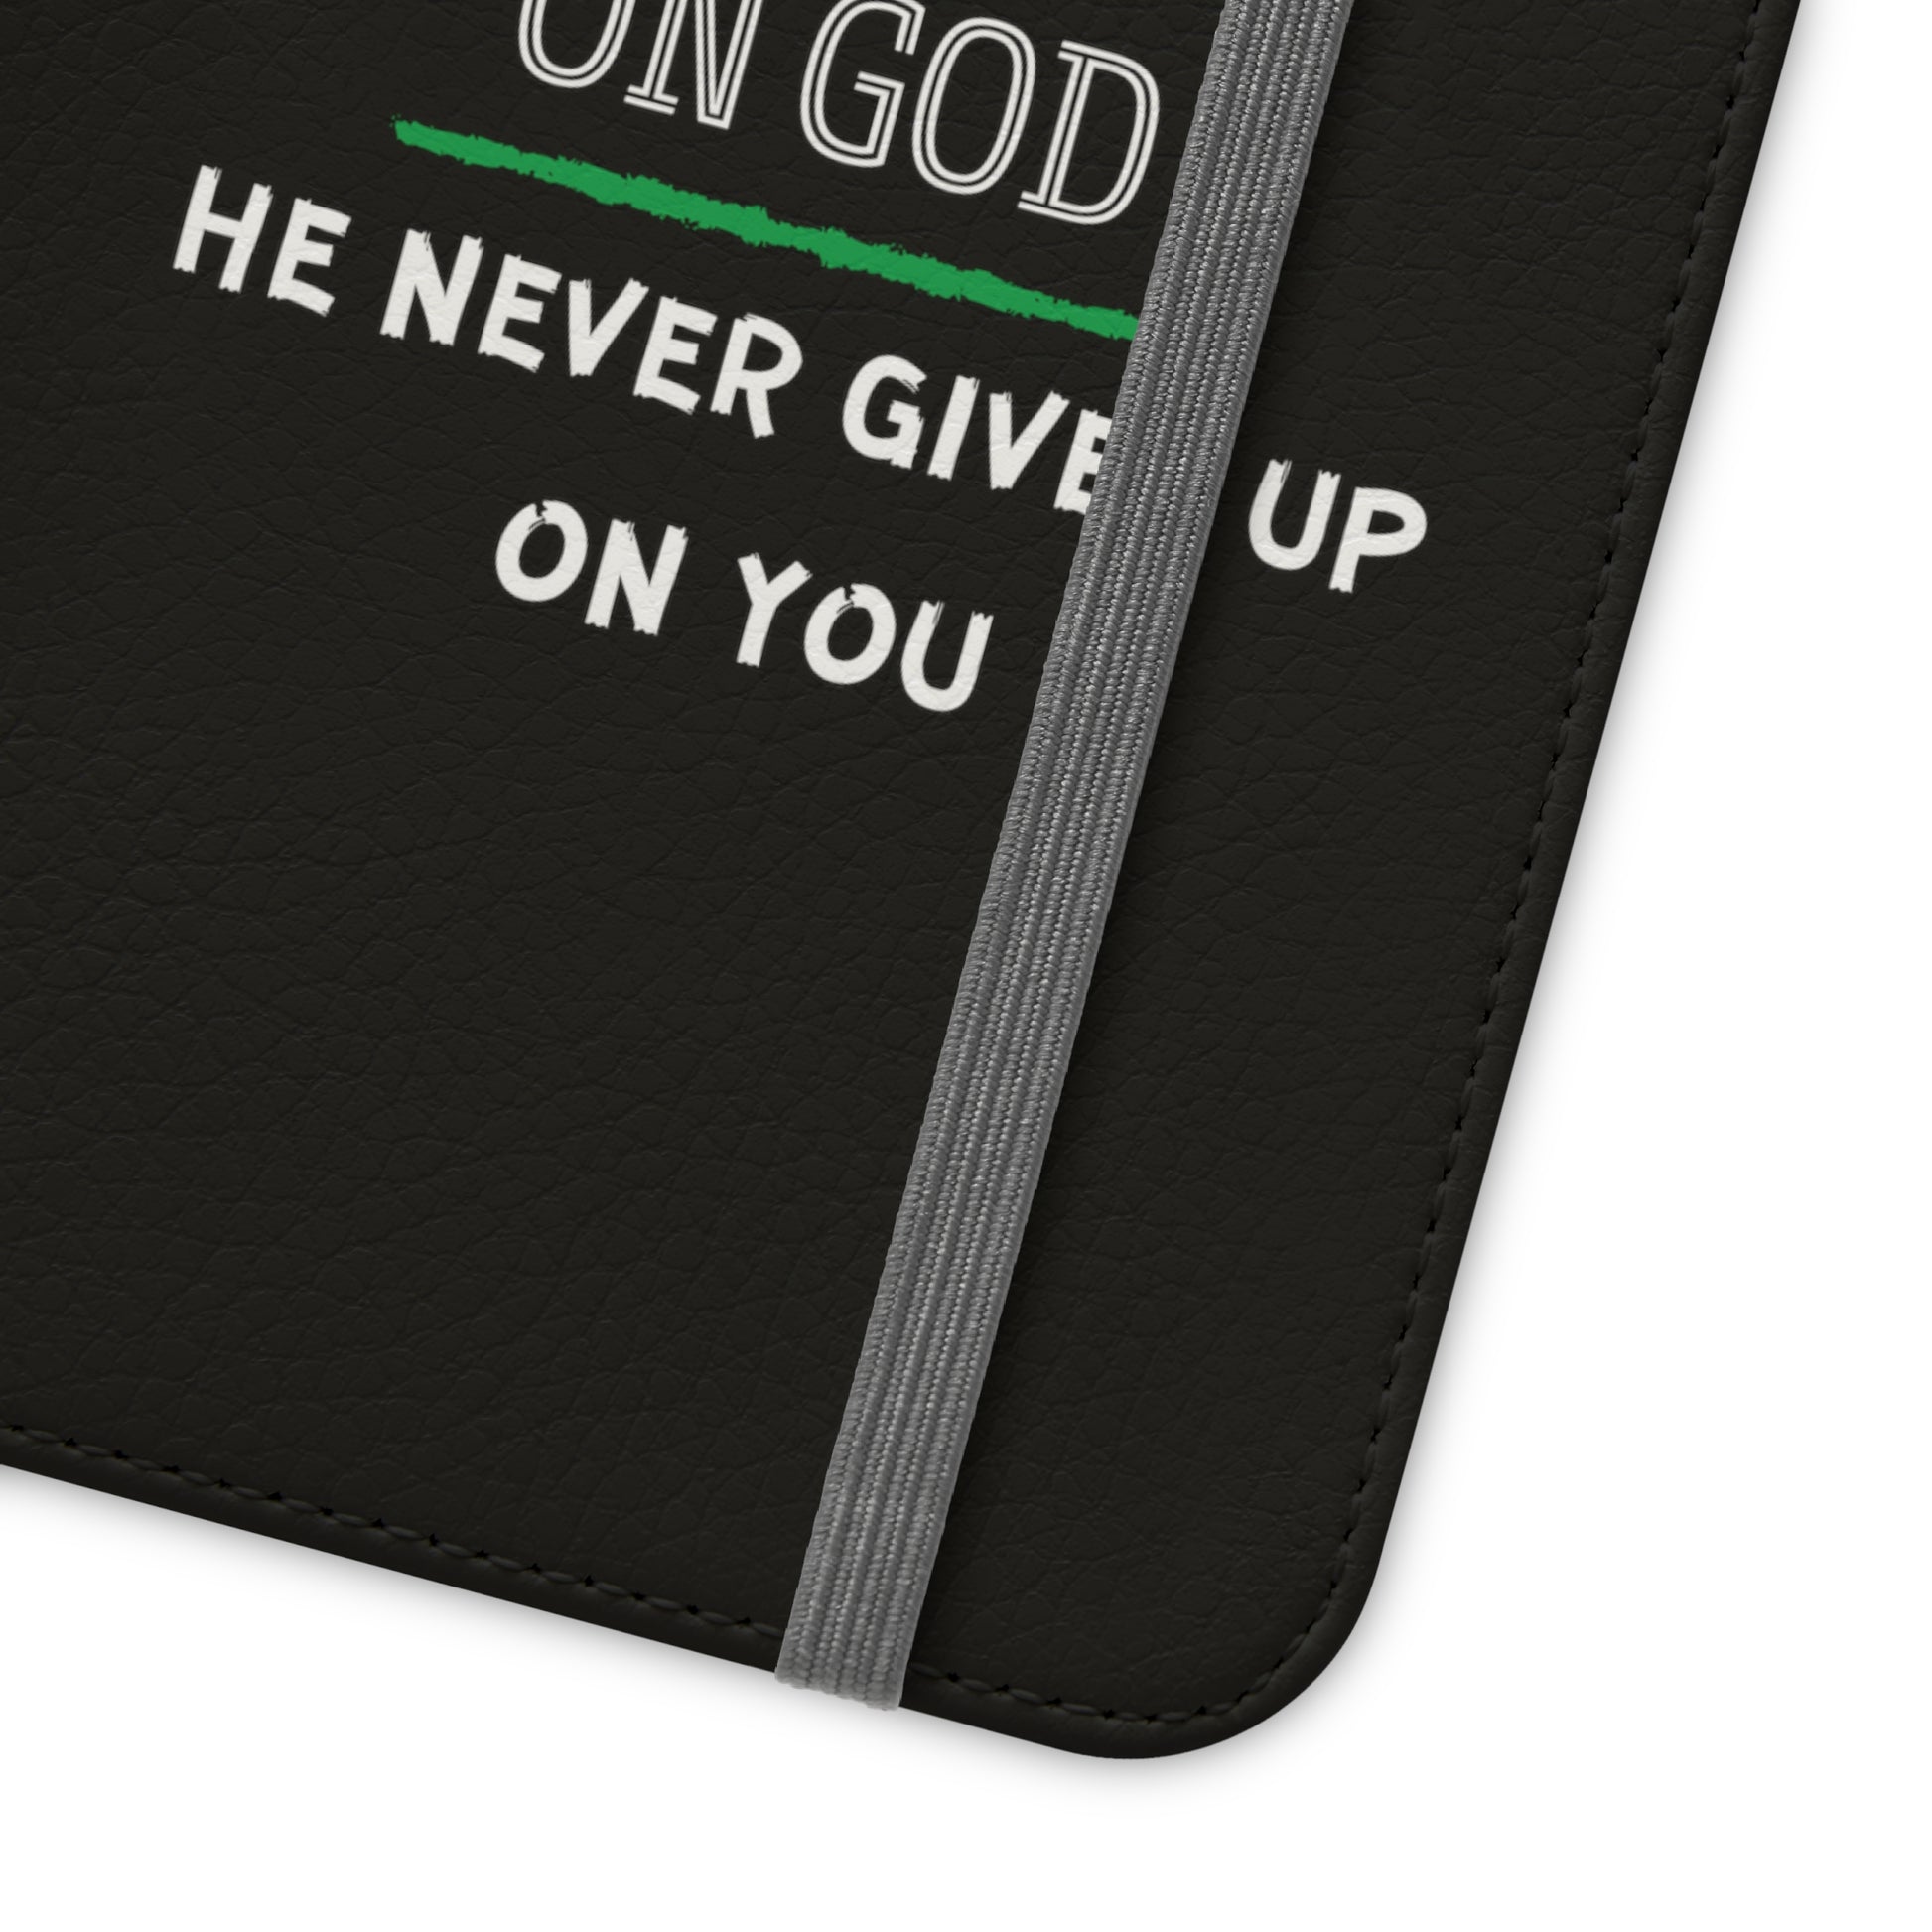 Never Give Up On God He Never Gives Up On You Christian Phone Flip Cases Printify